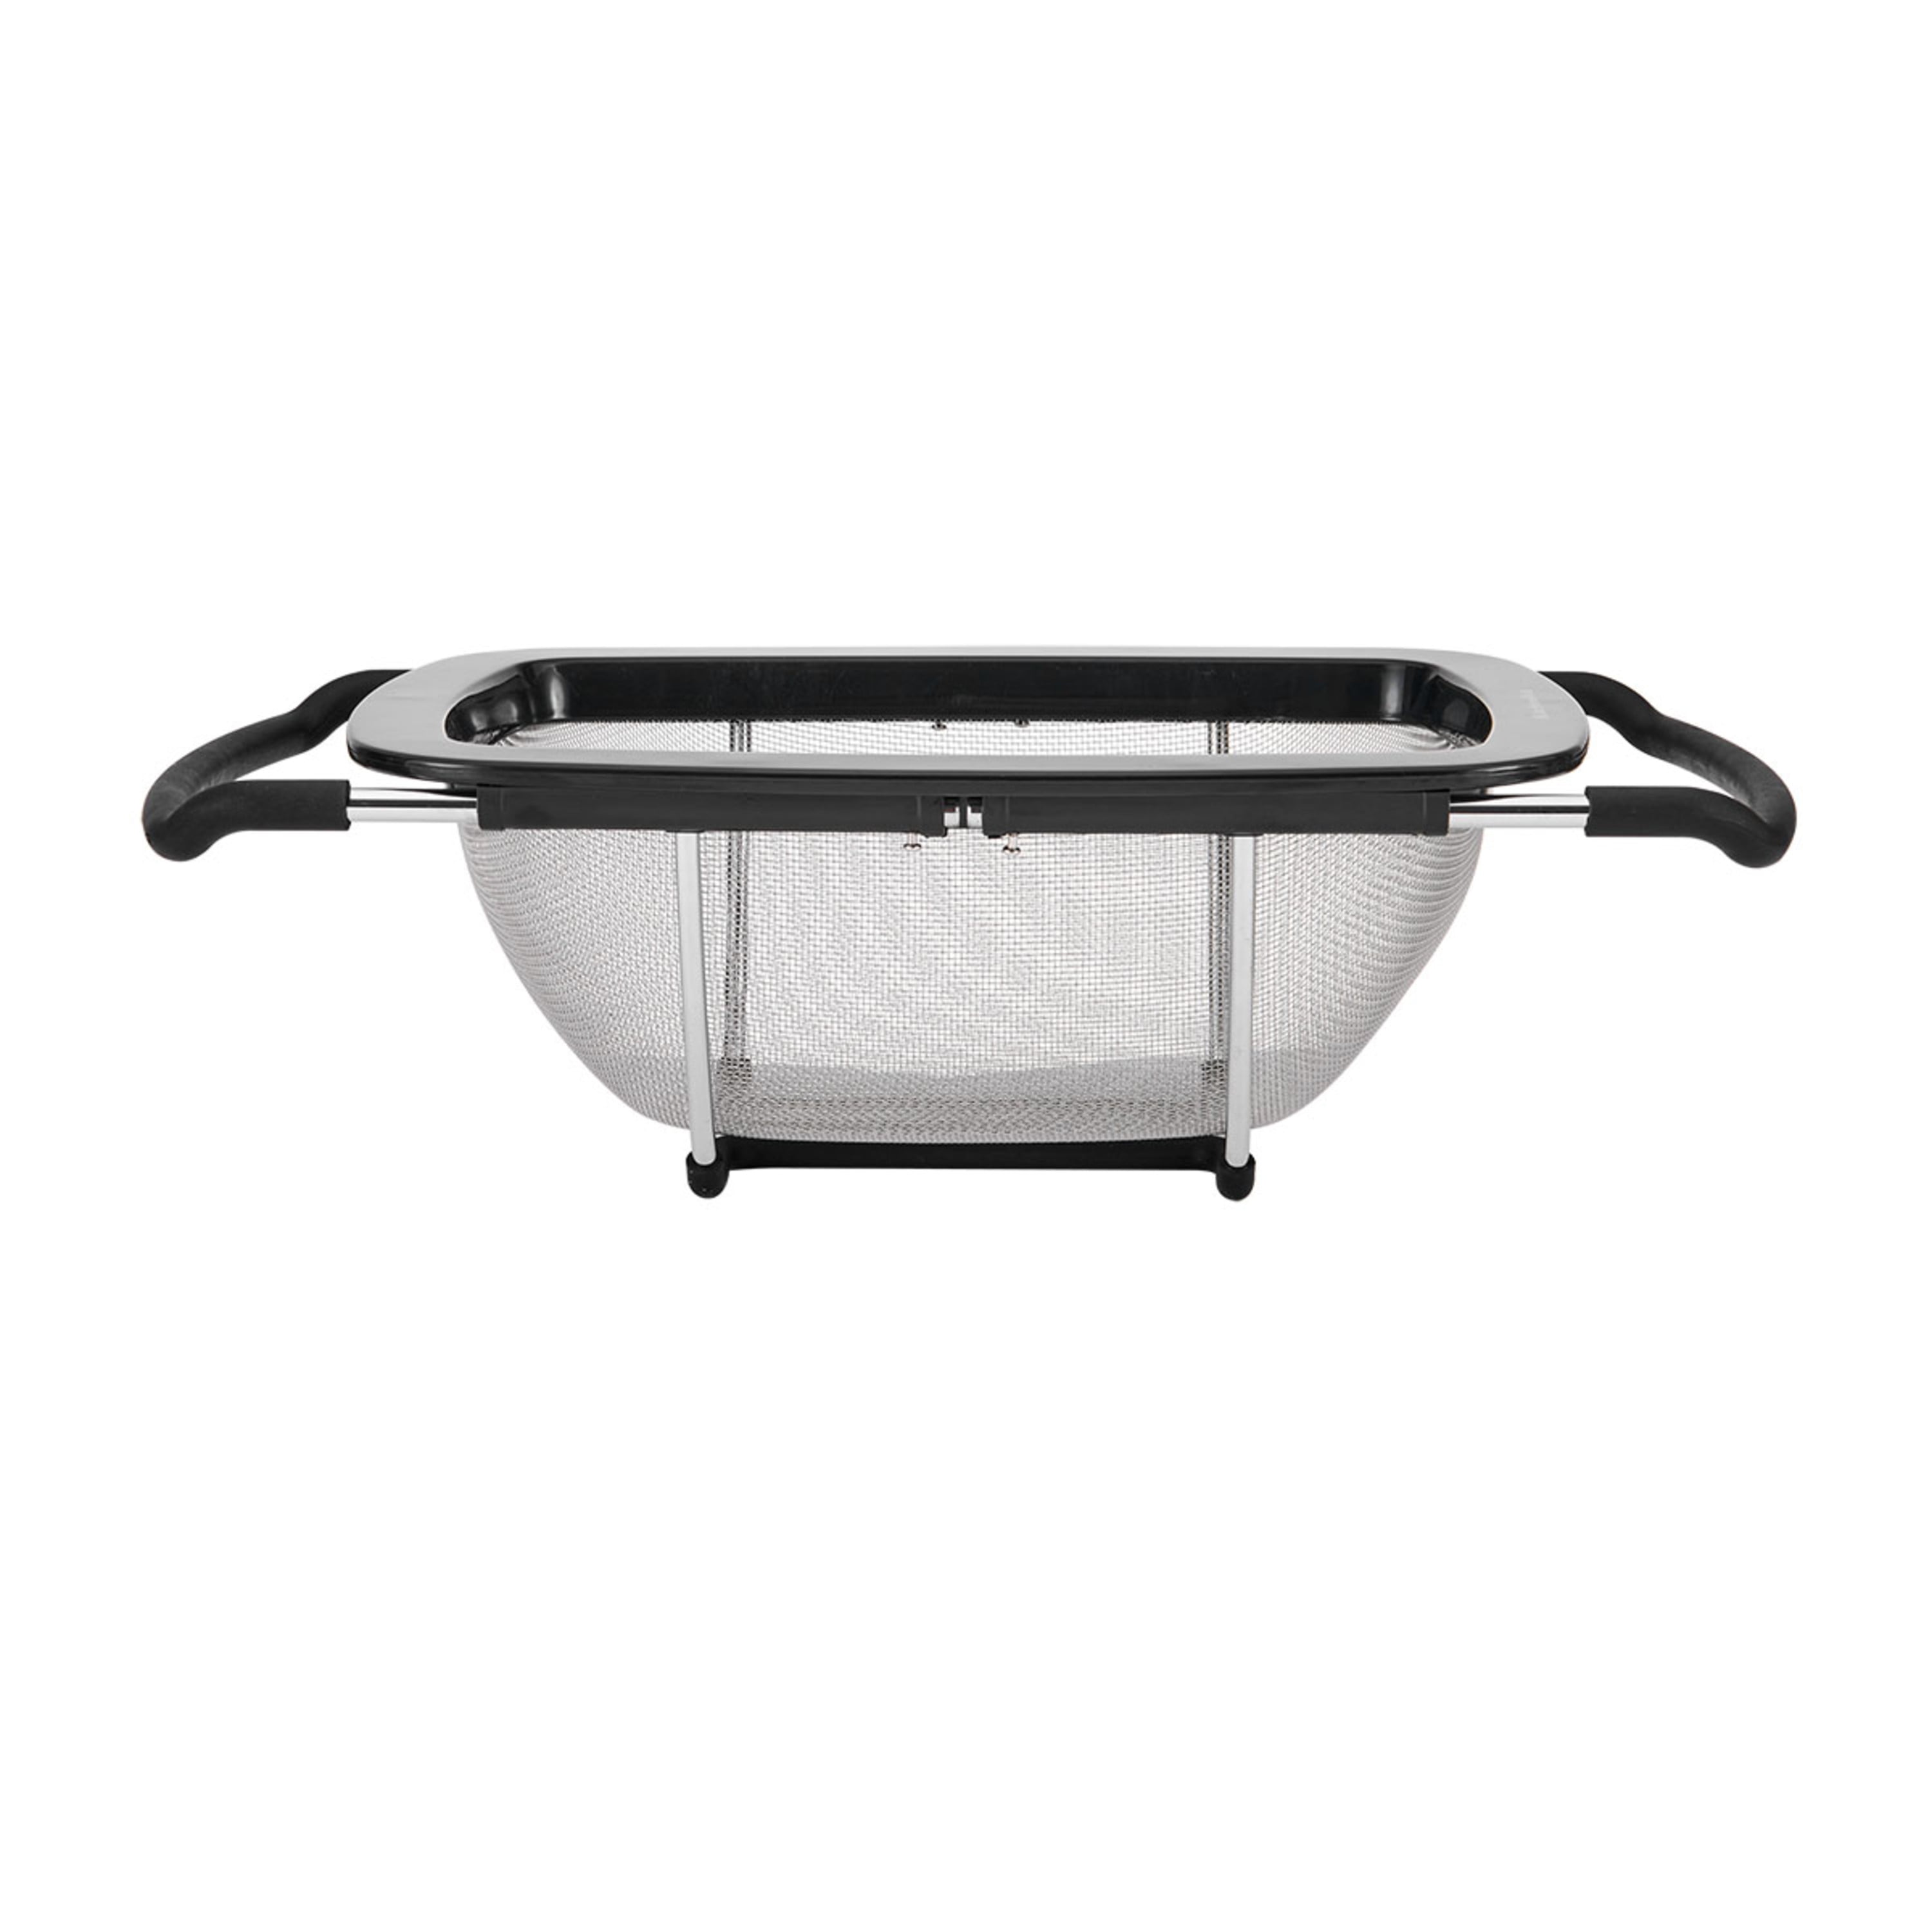  KitchenAid Expandable Stainless Steel Colander, One